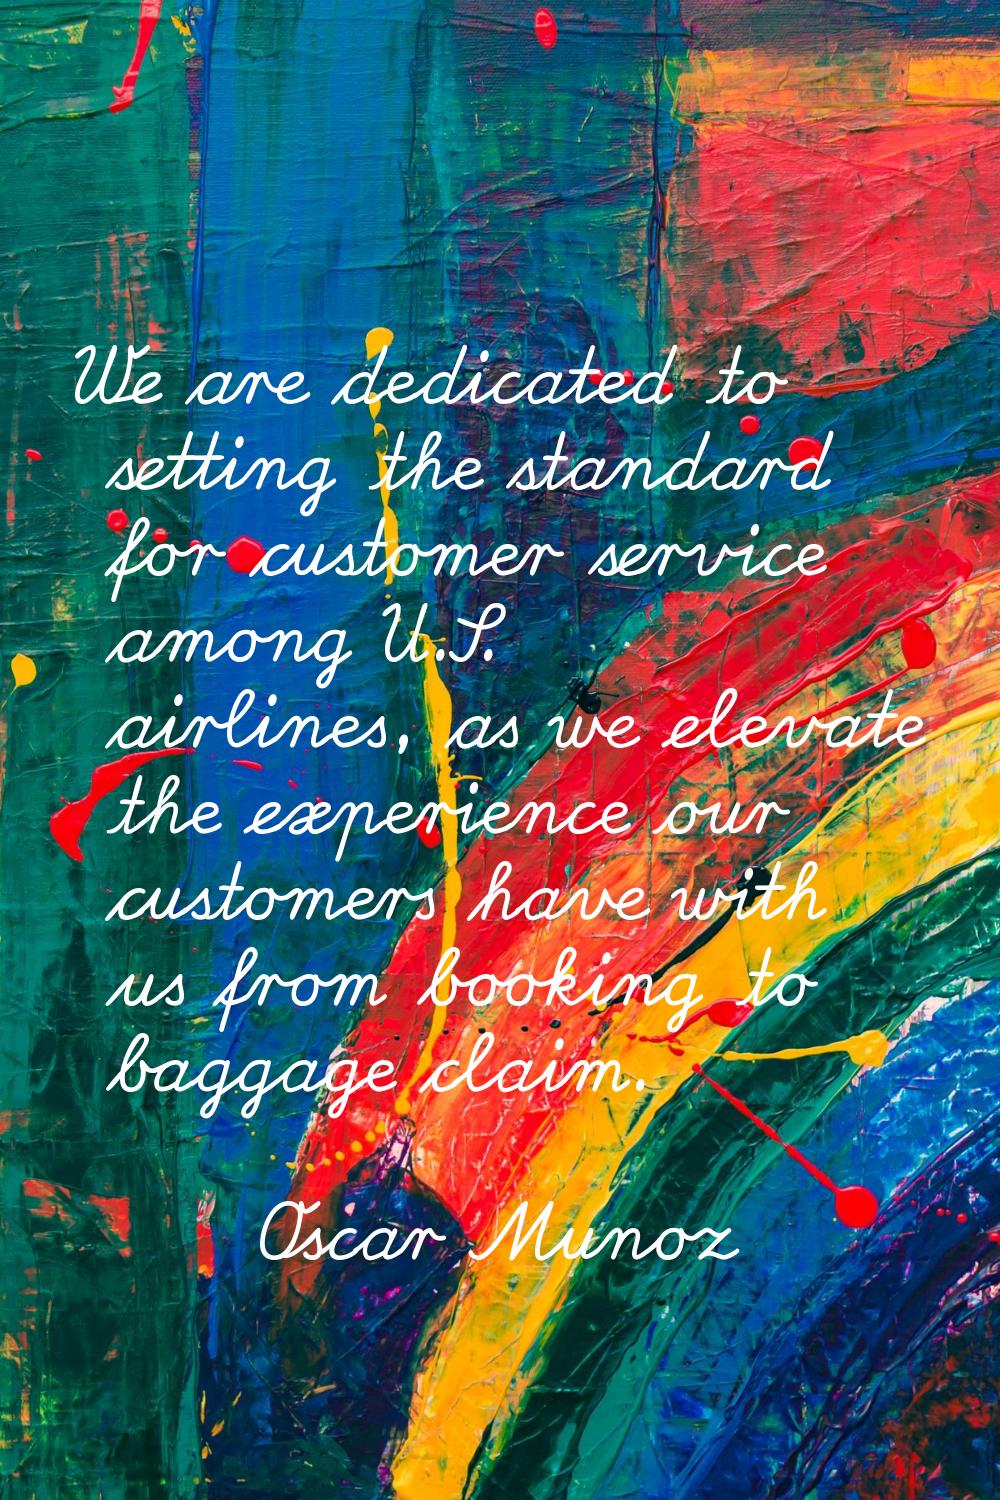 We are dedicated to setting the standard for customer service among U.S. airlines, as we elevate th